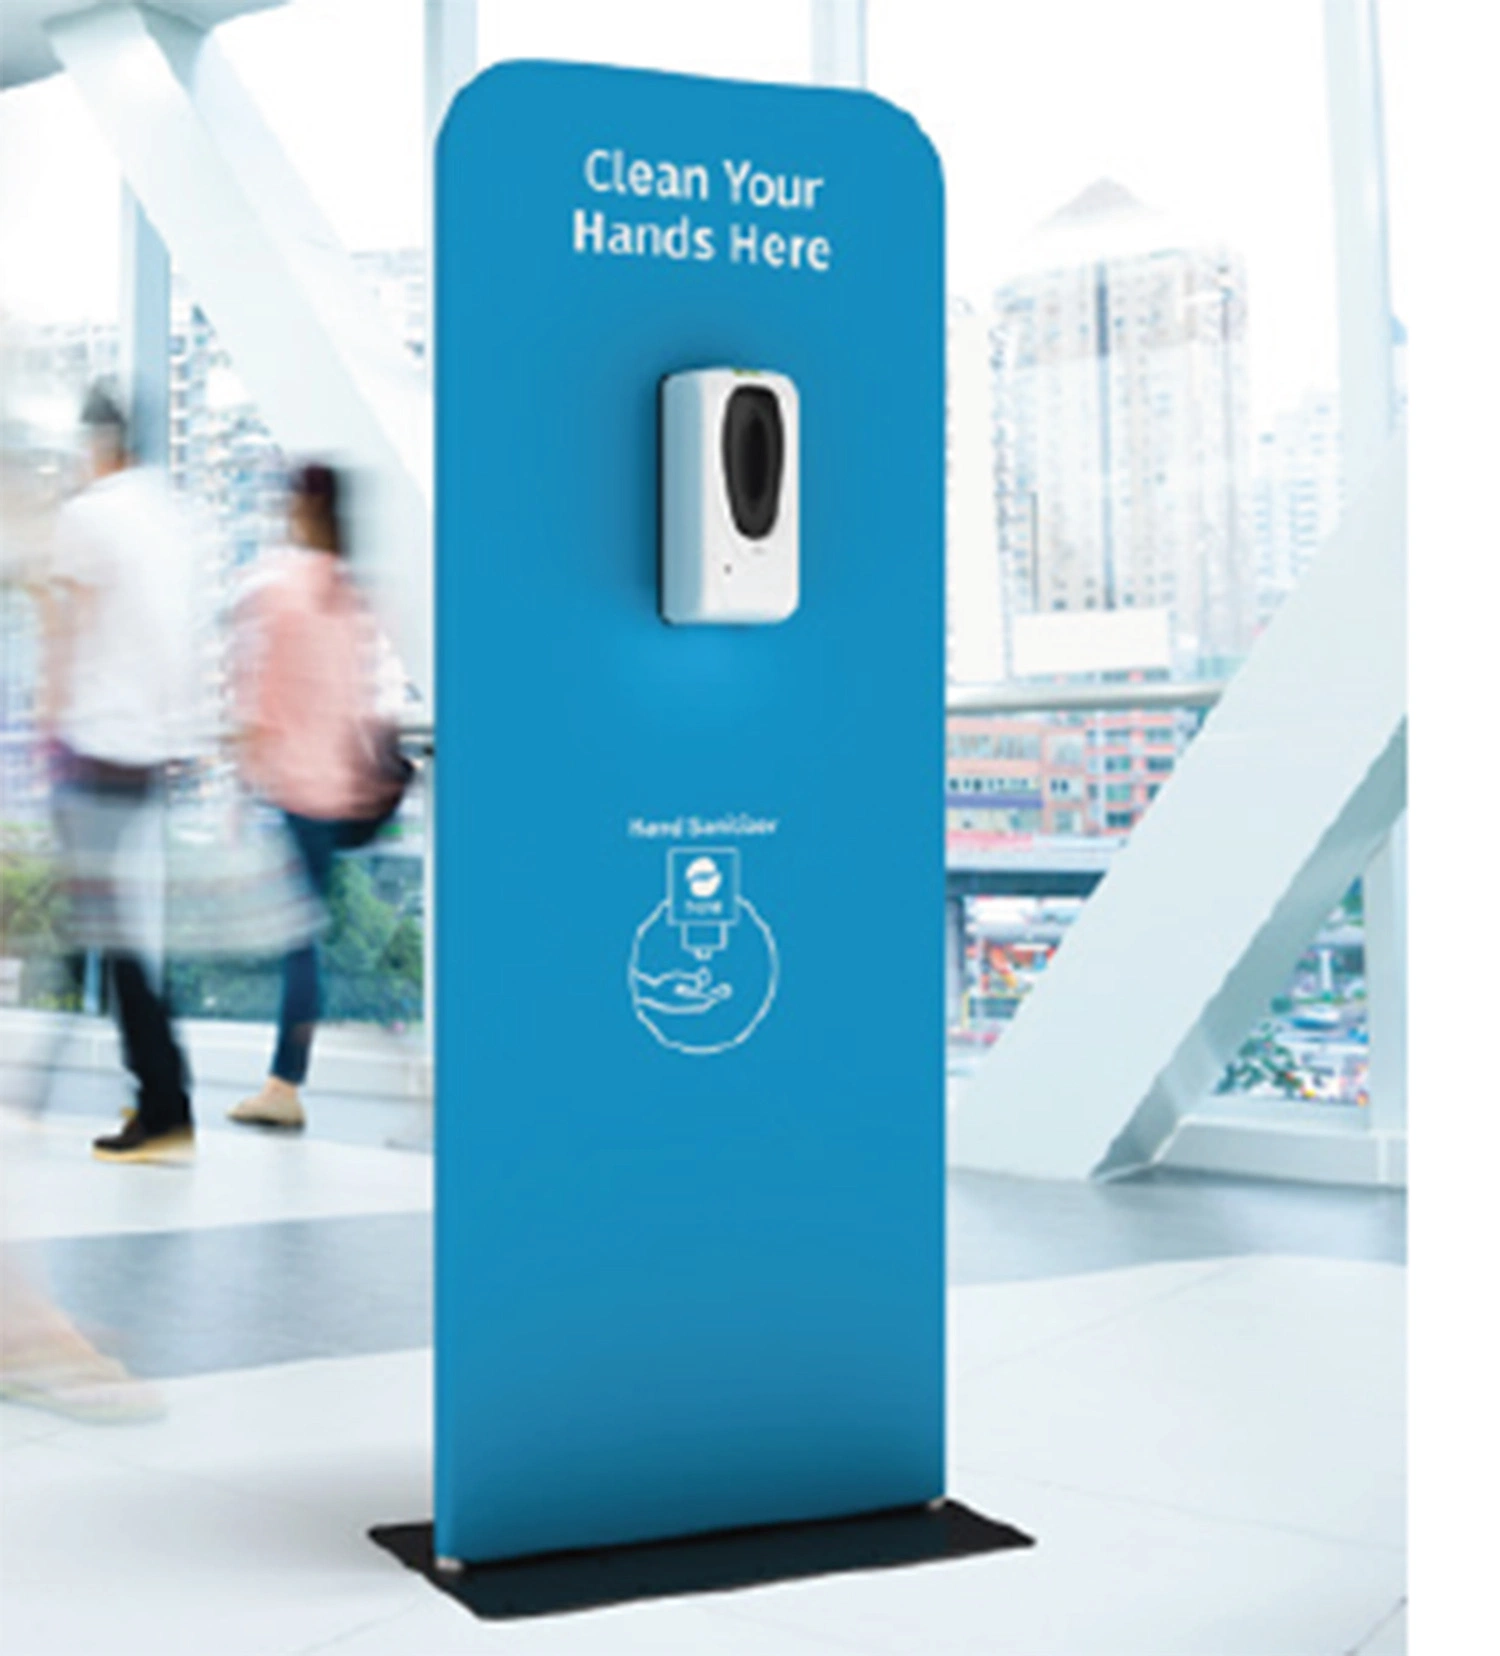 Touchless Automatic Hand Hygiene Sanitizer Soap Dispenser Floor Standing with a Stand Advertising